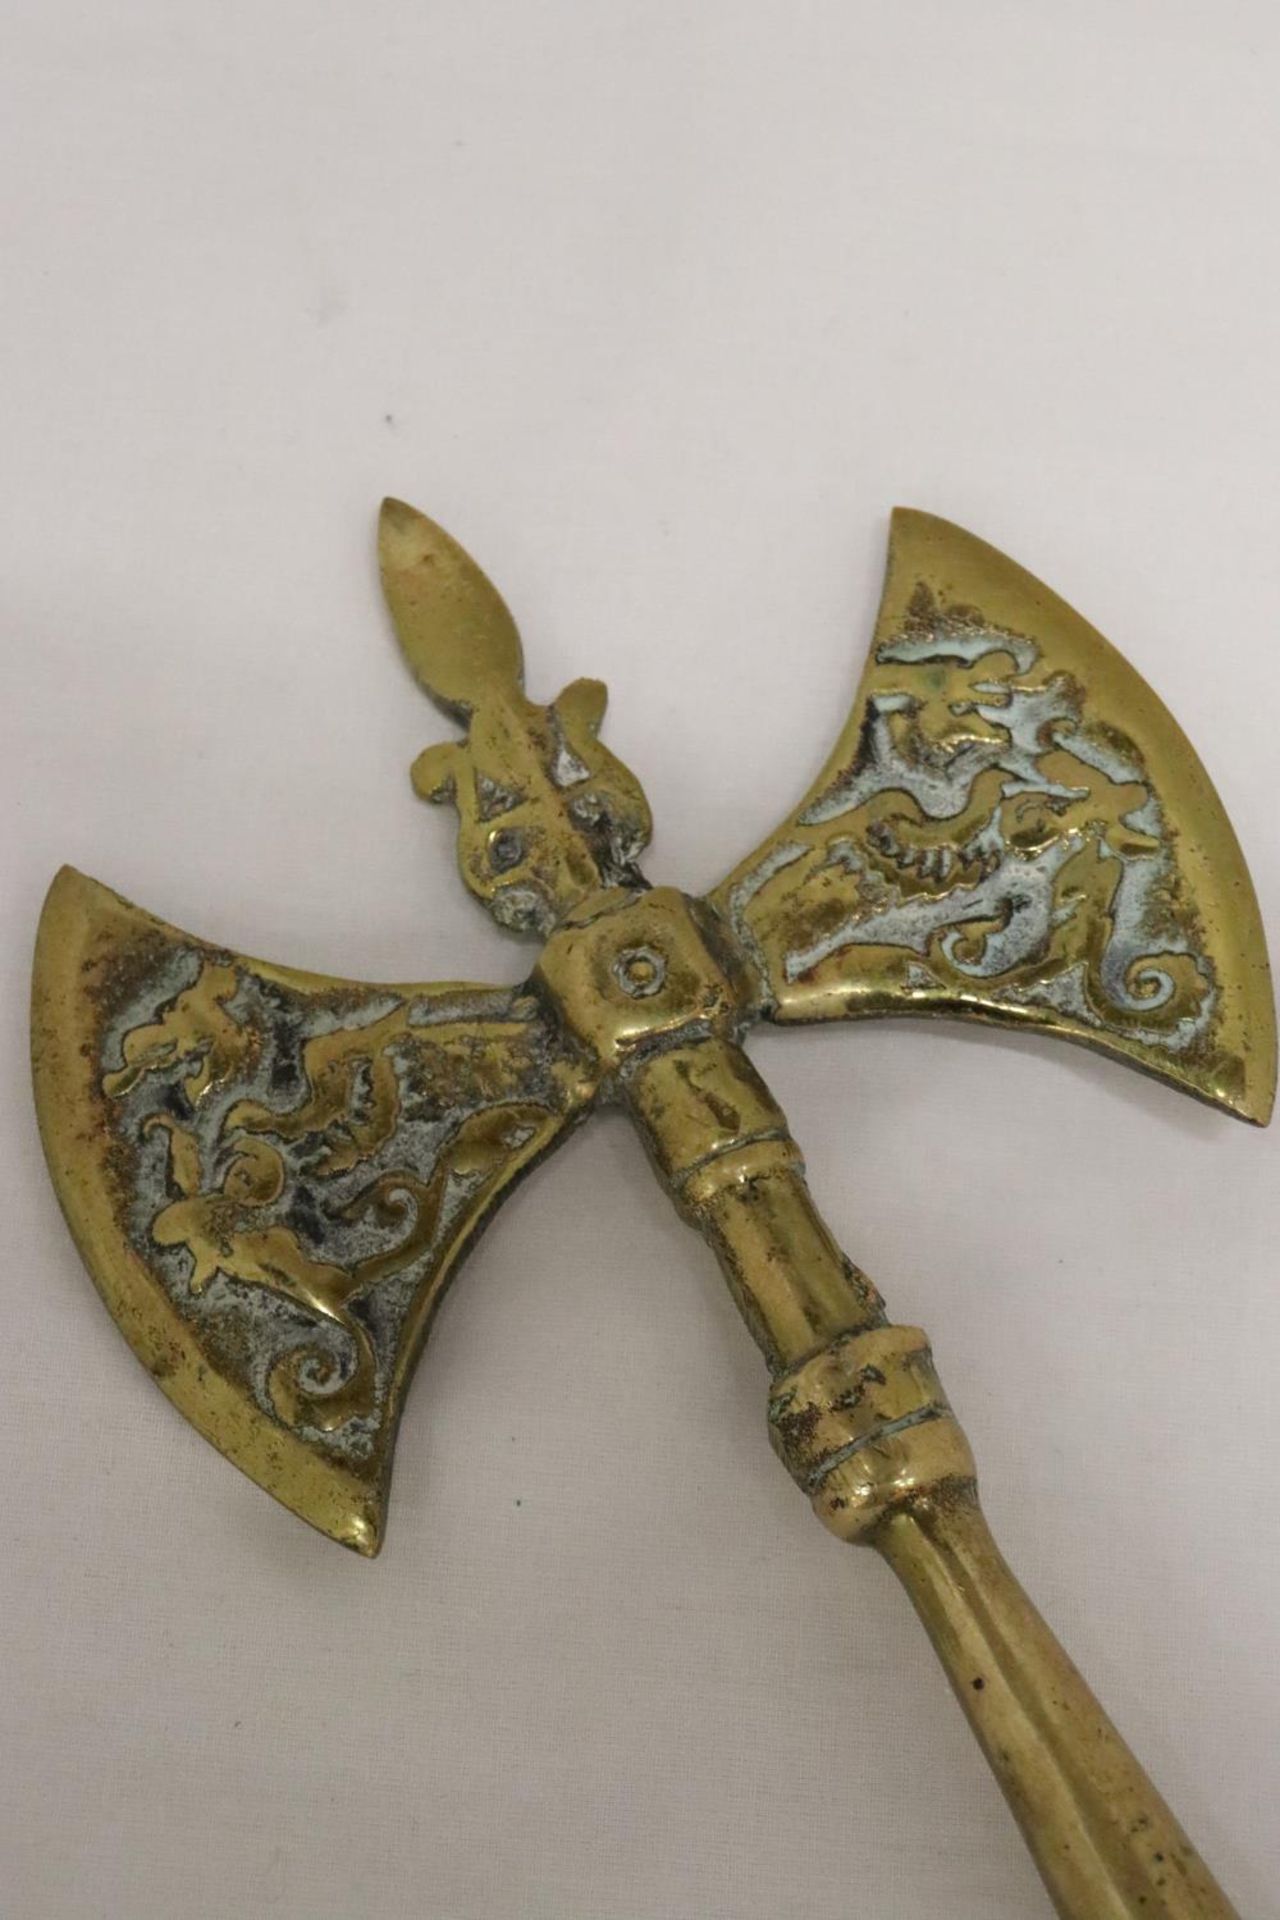 A DOUBLE HEADED AXE - Image 6 of 6